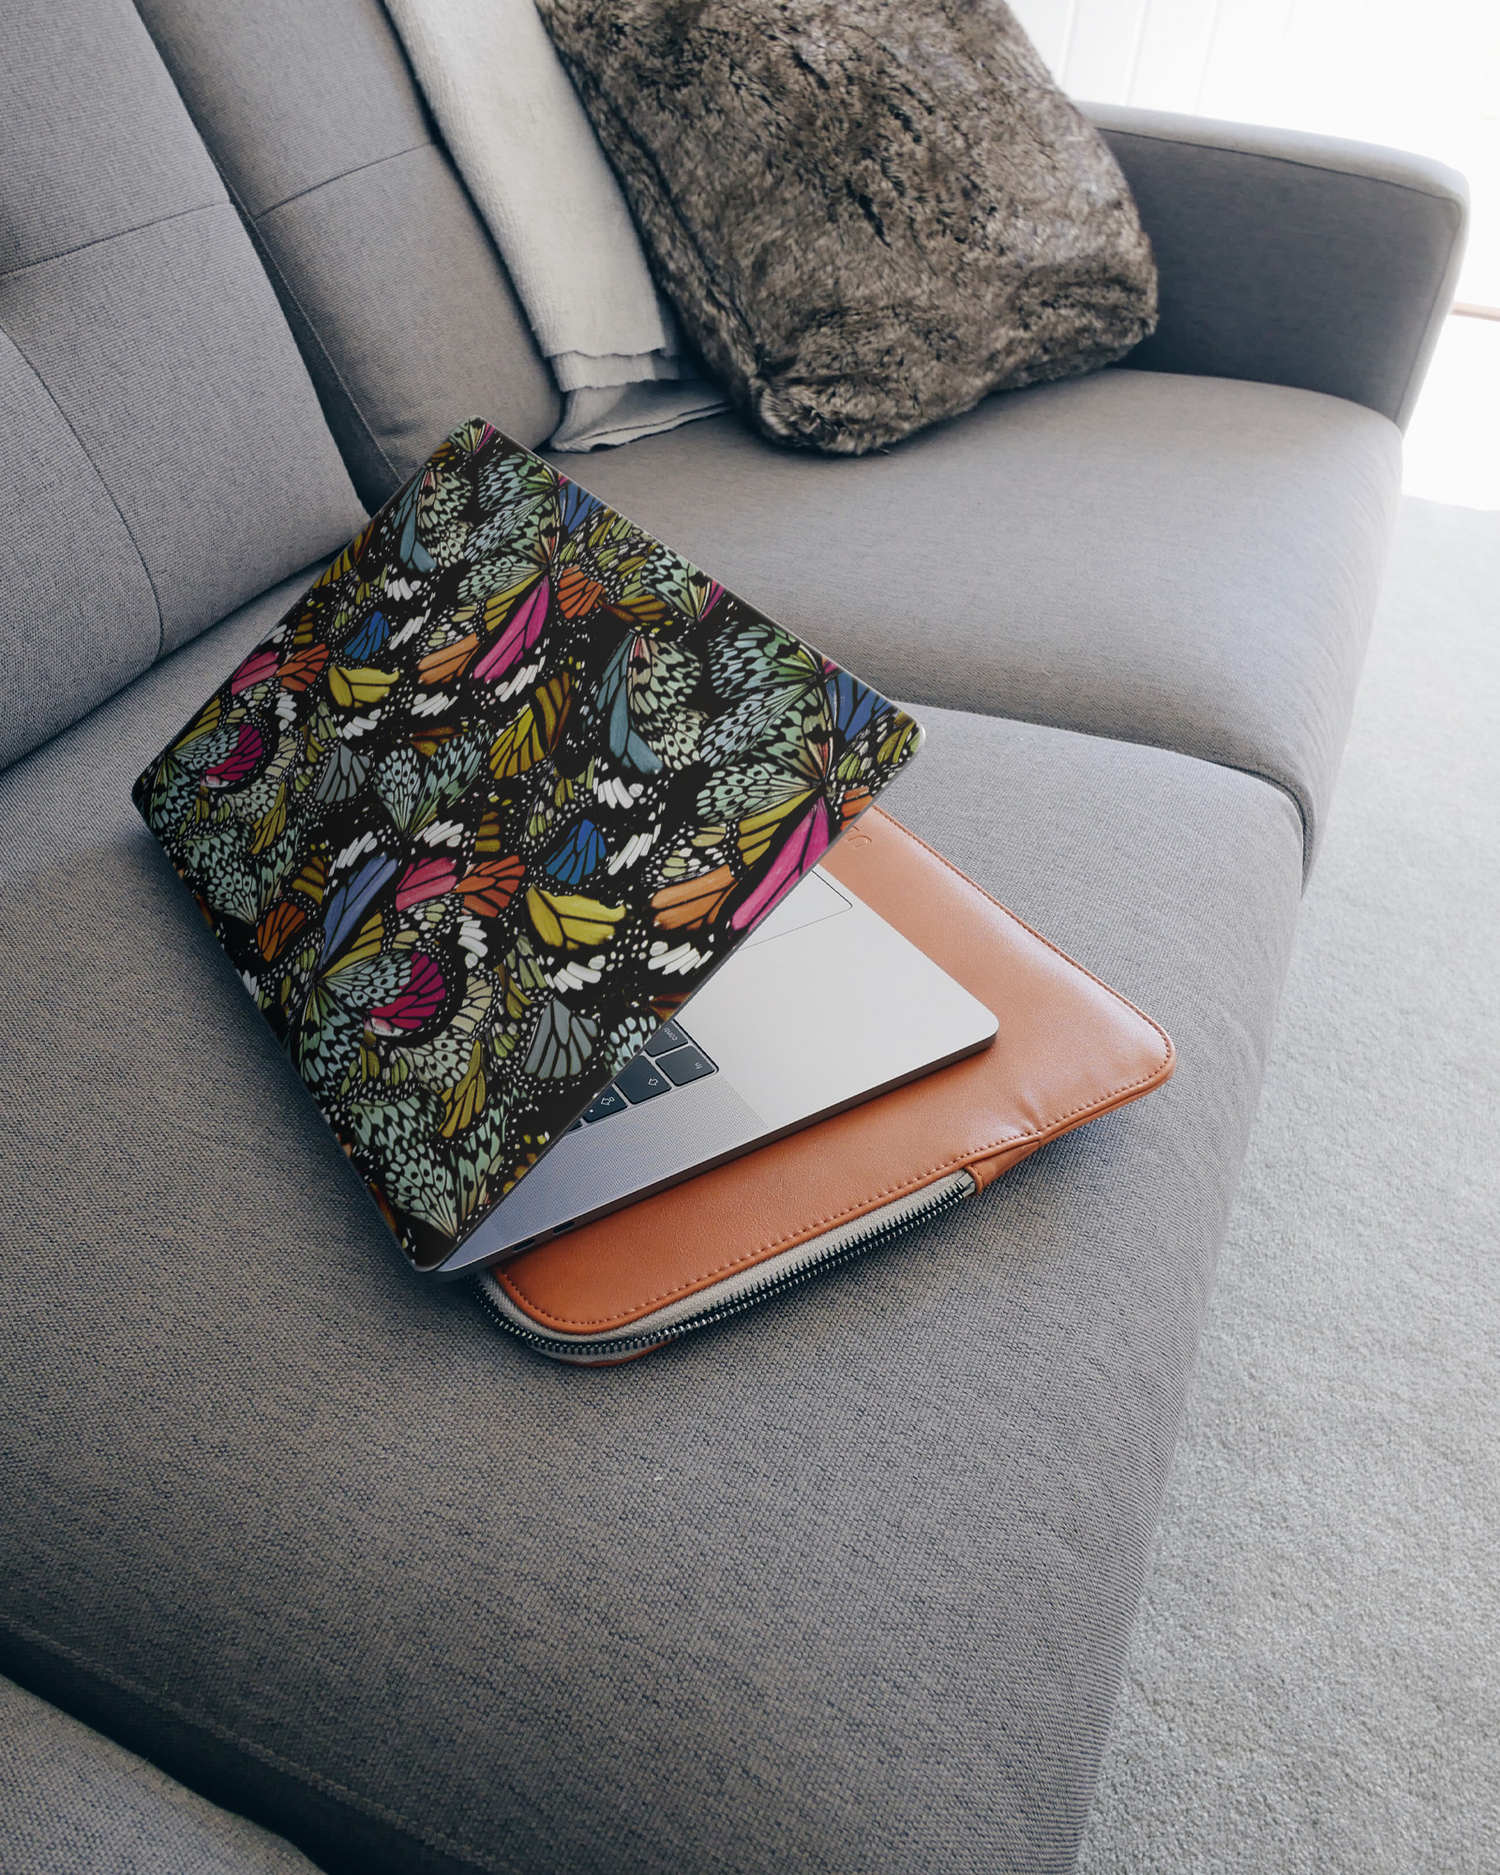 Psychedelic Butterflies Laptop Skin for 15 inch Apple MacBooks on a couch